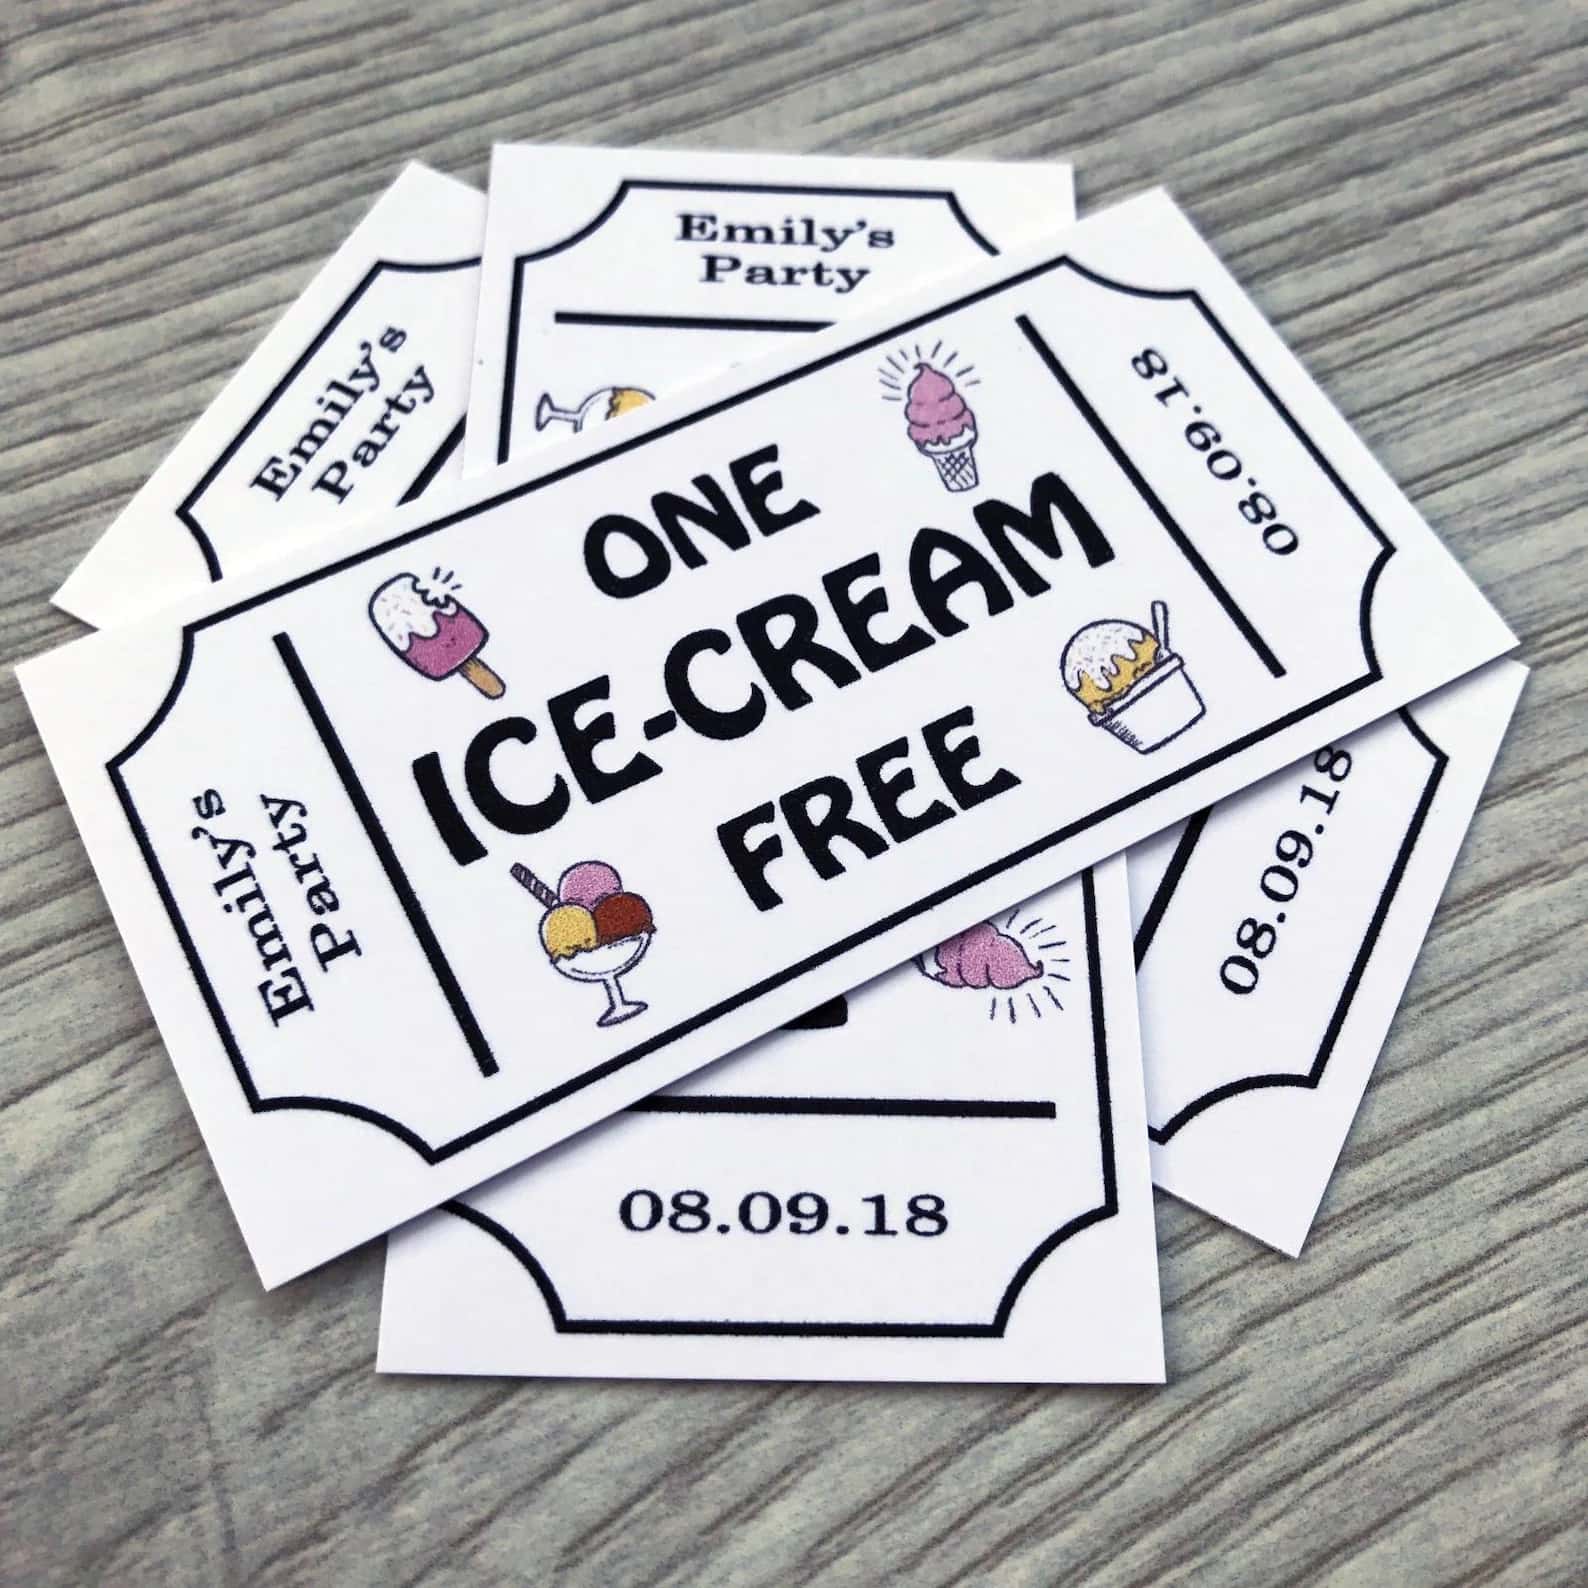 Ice cream party gift certificates